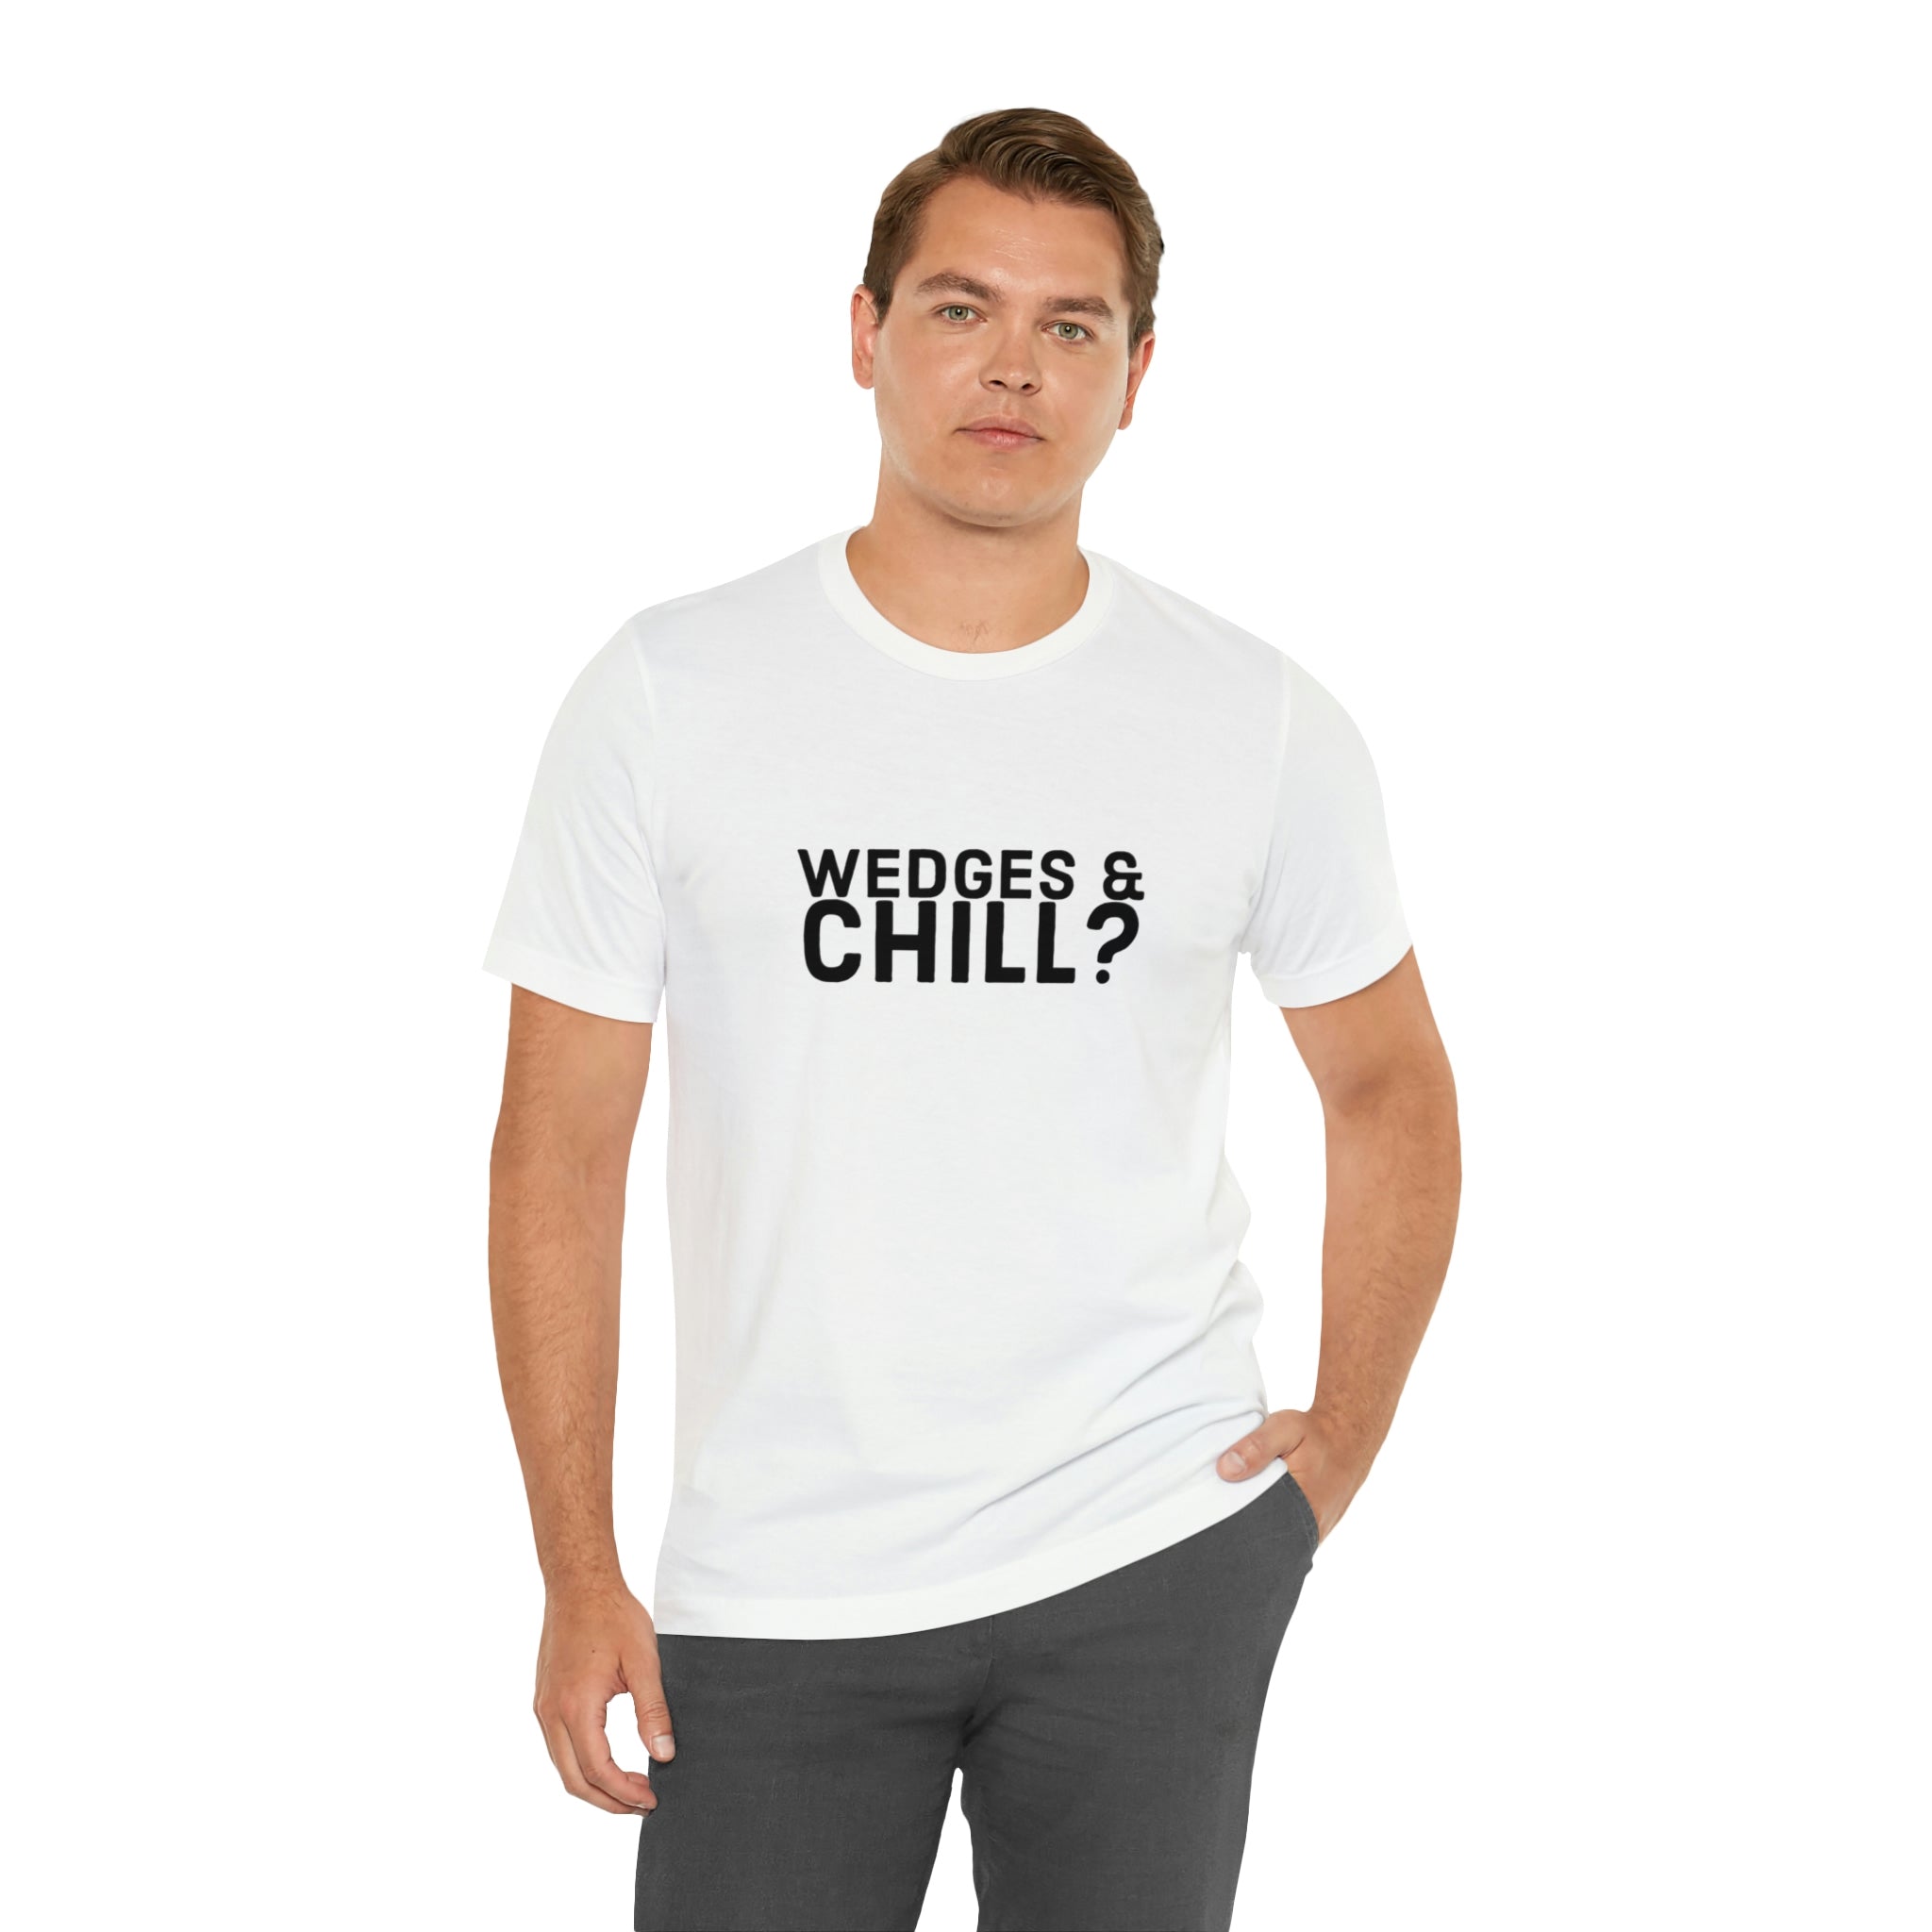 WEDGES & CHILL? Tee 